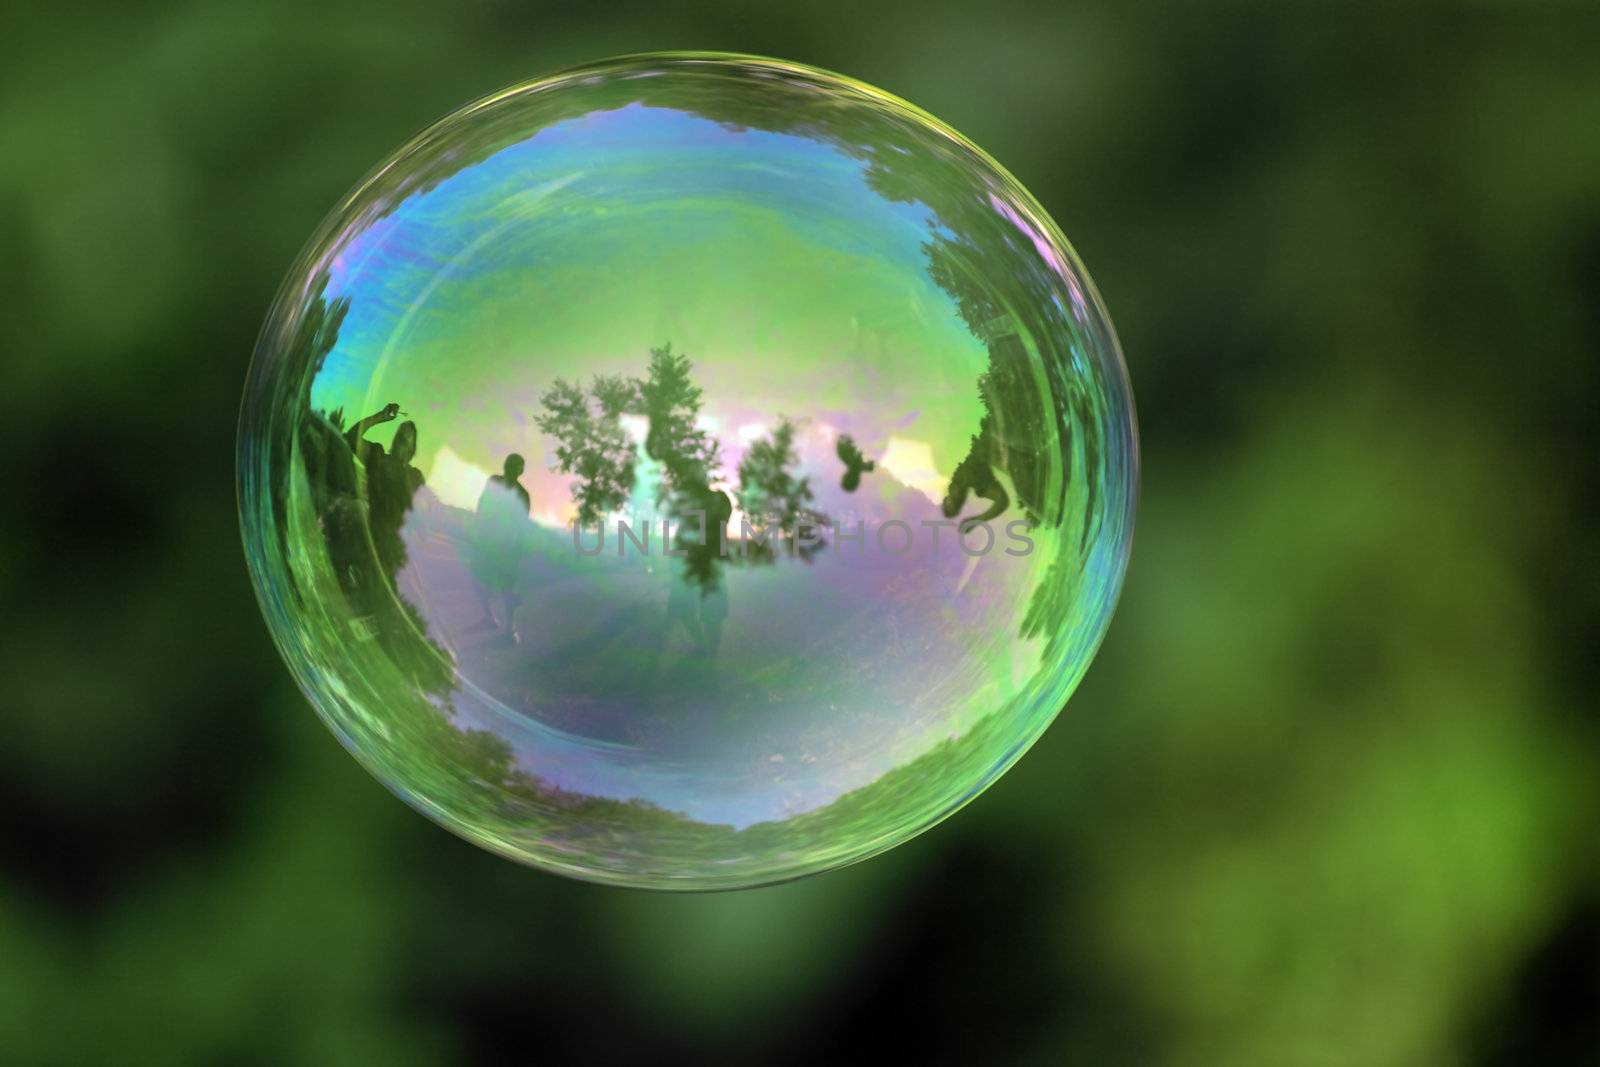 transparent bubble with reflections on a green organic background